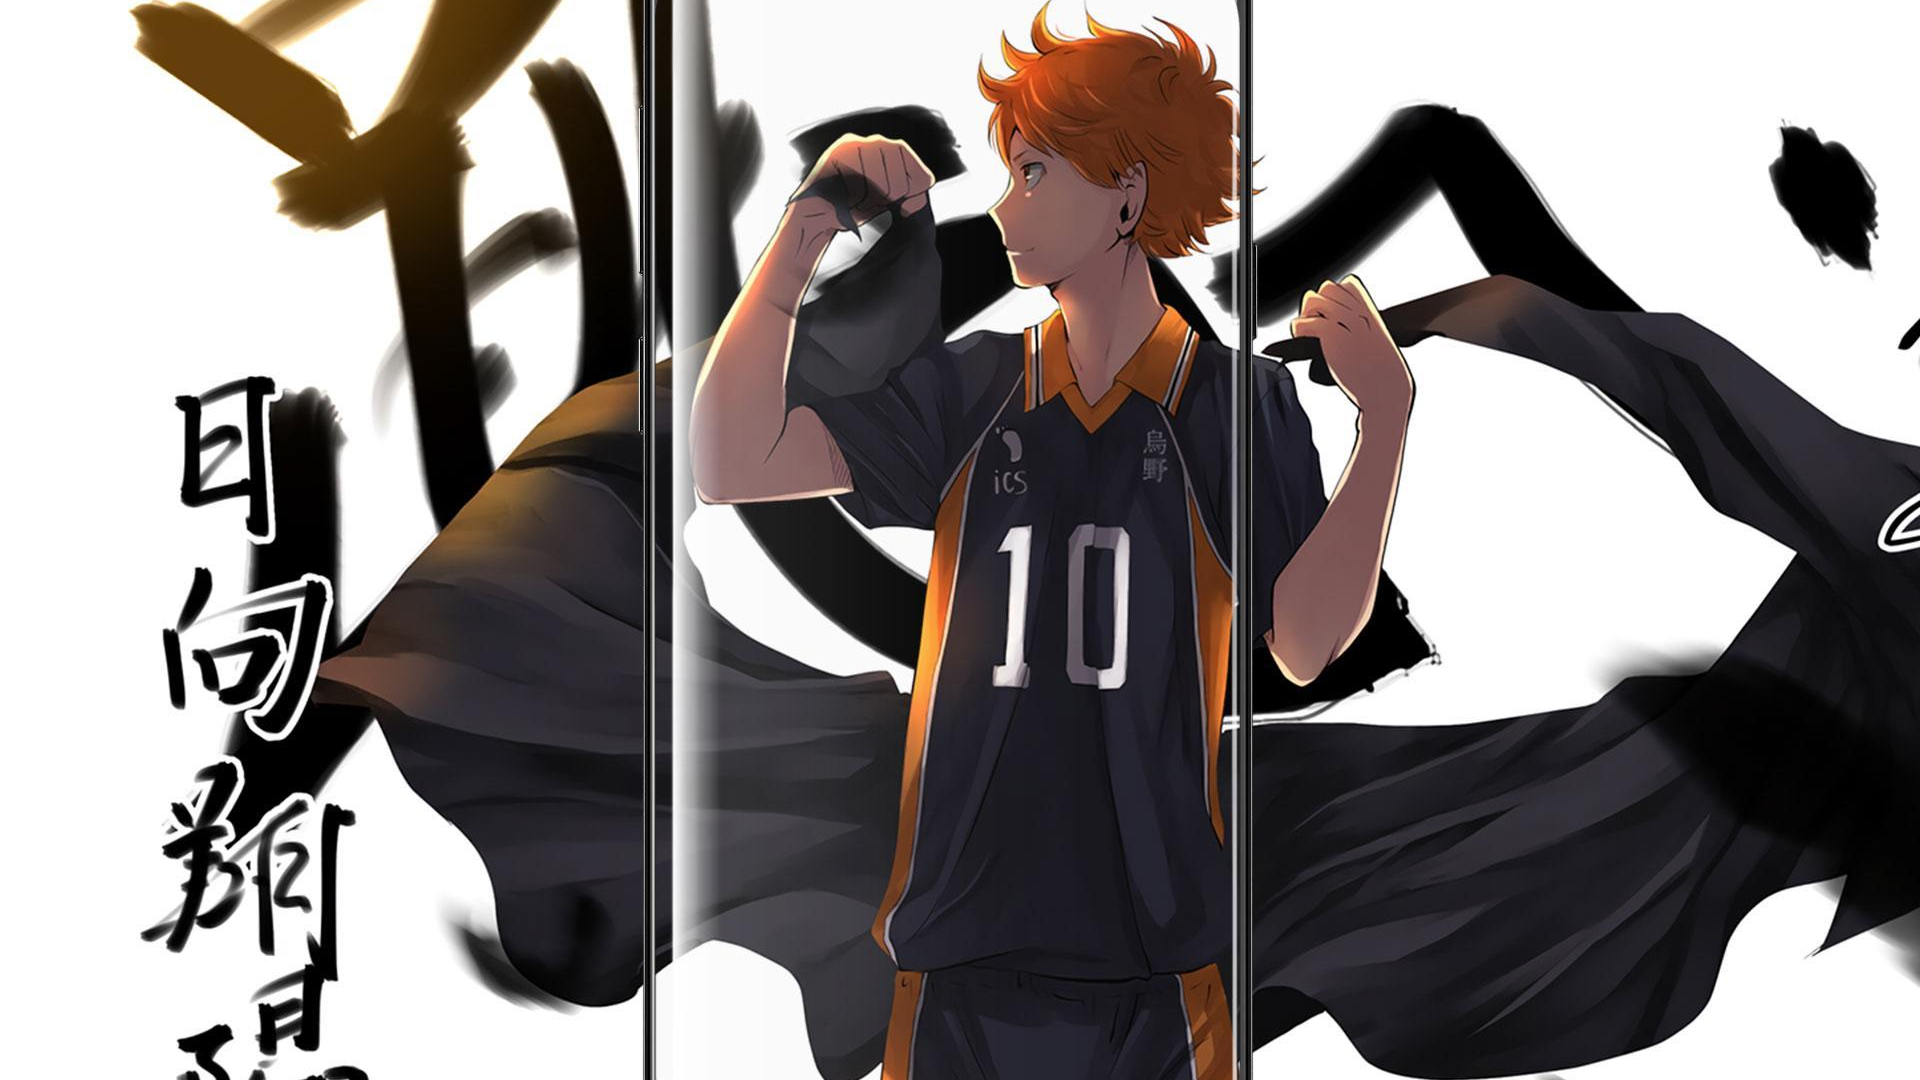 Free download Haikyuu HD Wallpaper for Android APK Download [1920x1440] for your Desktop, Mobile & Tablet. Explore Haikyuu HD Wallpaper. HD Wallpaper HD Pic, HD Wallpaper HD Free, Wallpaper